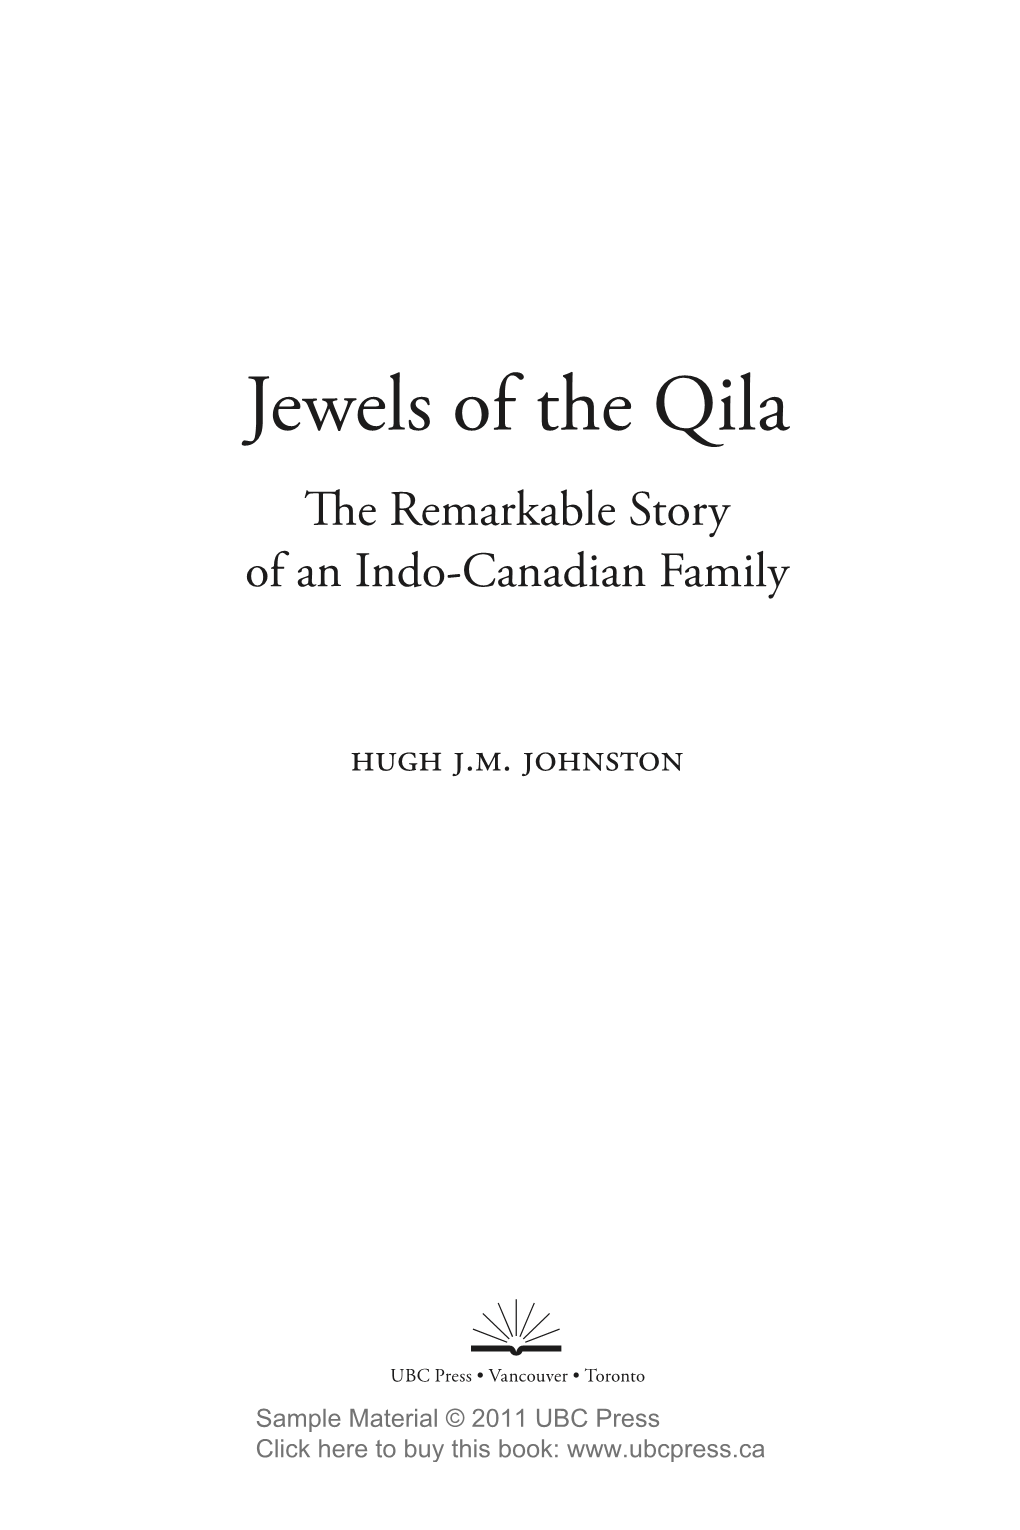 Jewels of the Qila the Remarkable Story of an Indo-Canadian Family